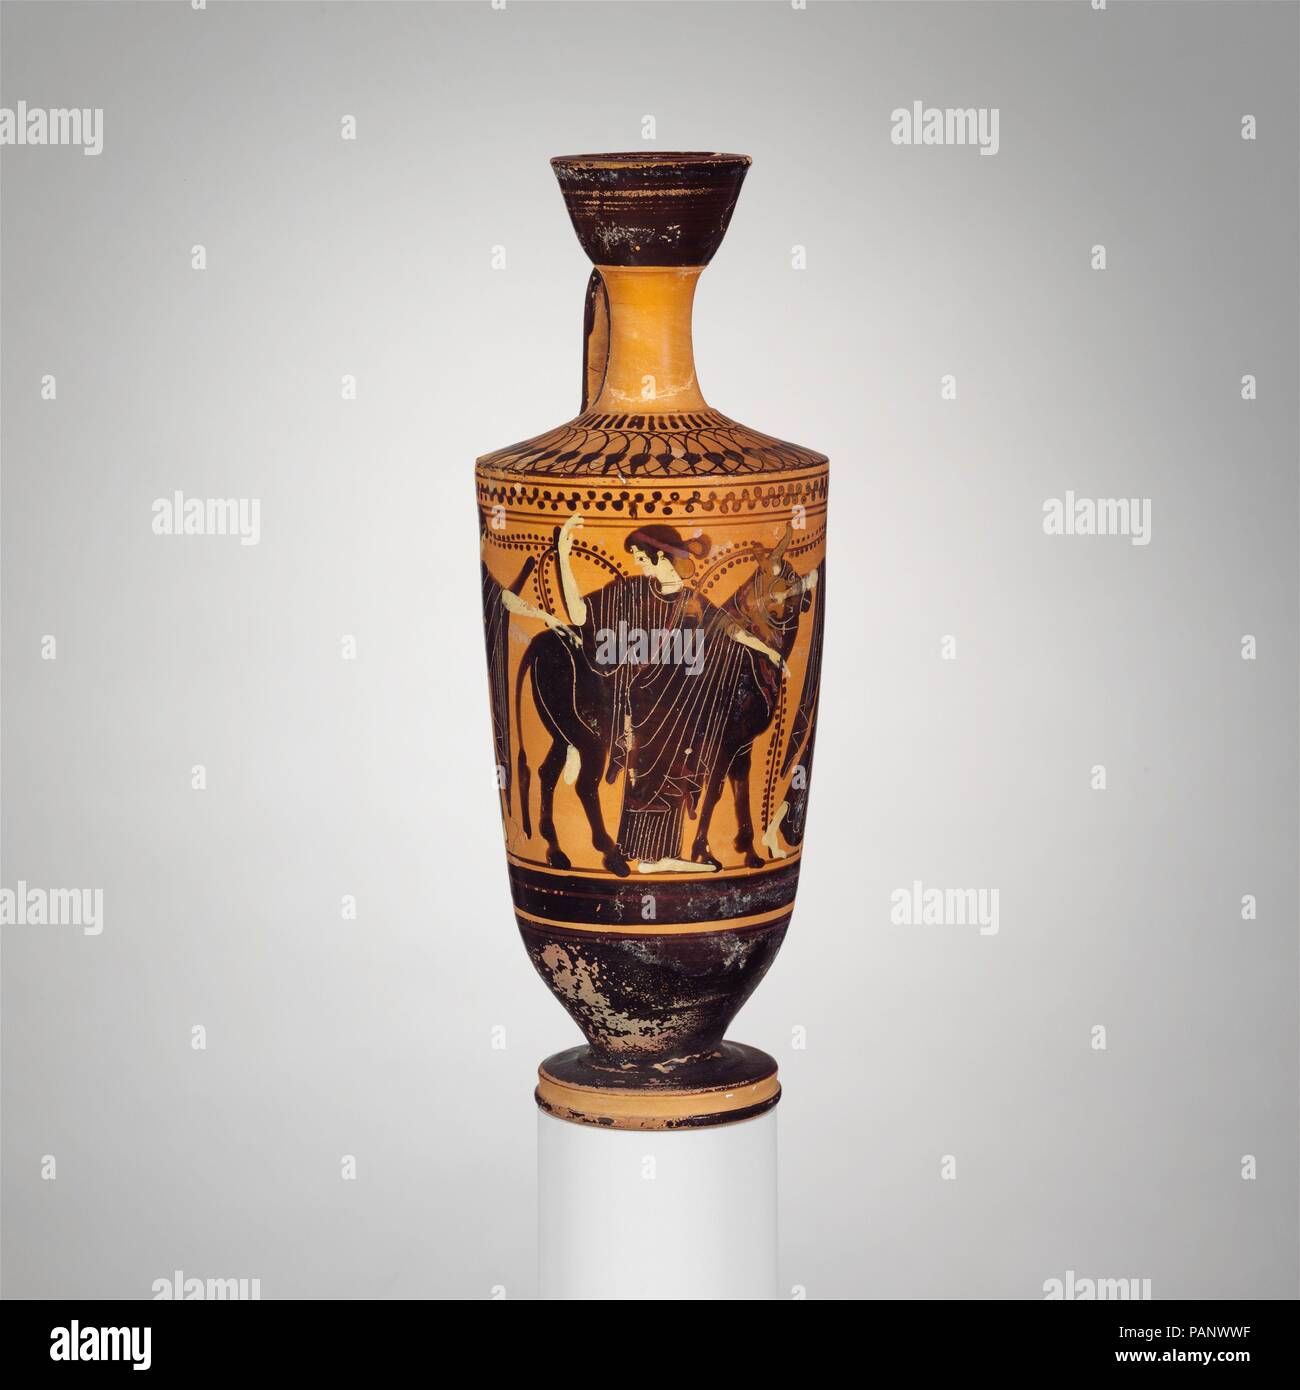 Terracotta lekythos (oil flask). Culture: Greek, Attic. Dimensions: H. 7 7/8 in. (20 cm). Date: 1st quarter of 5th century B.C..  Sacrificial procession with bull and three women. Museum: Metropolitan Museum of Art, New York, USA. Stock Photo